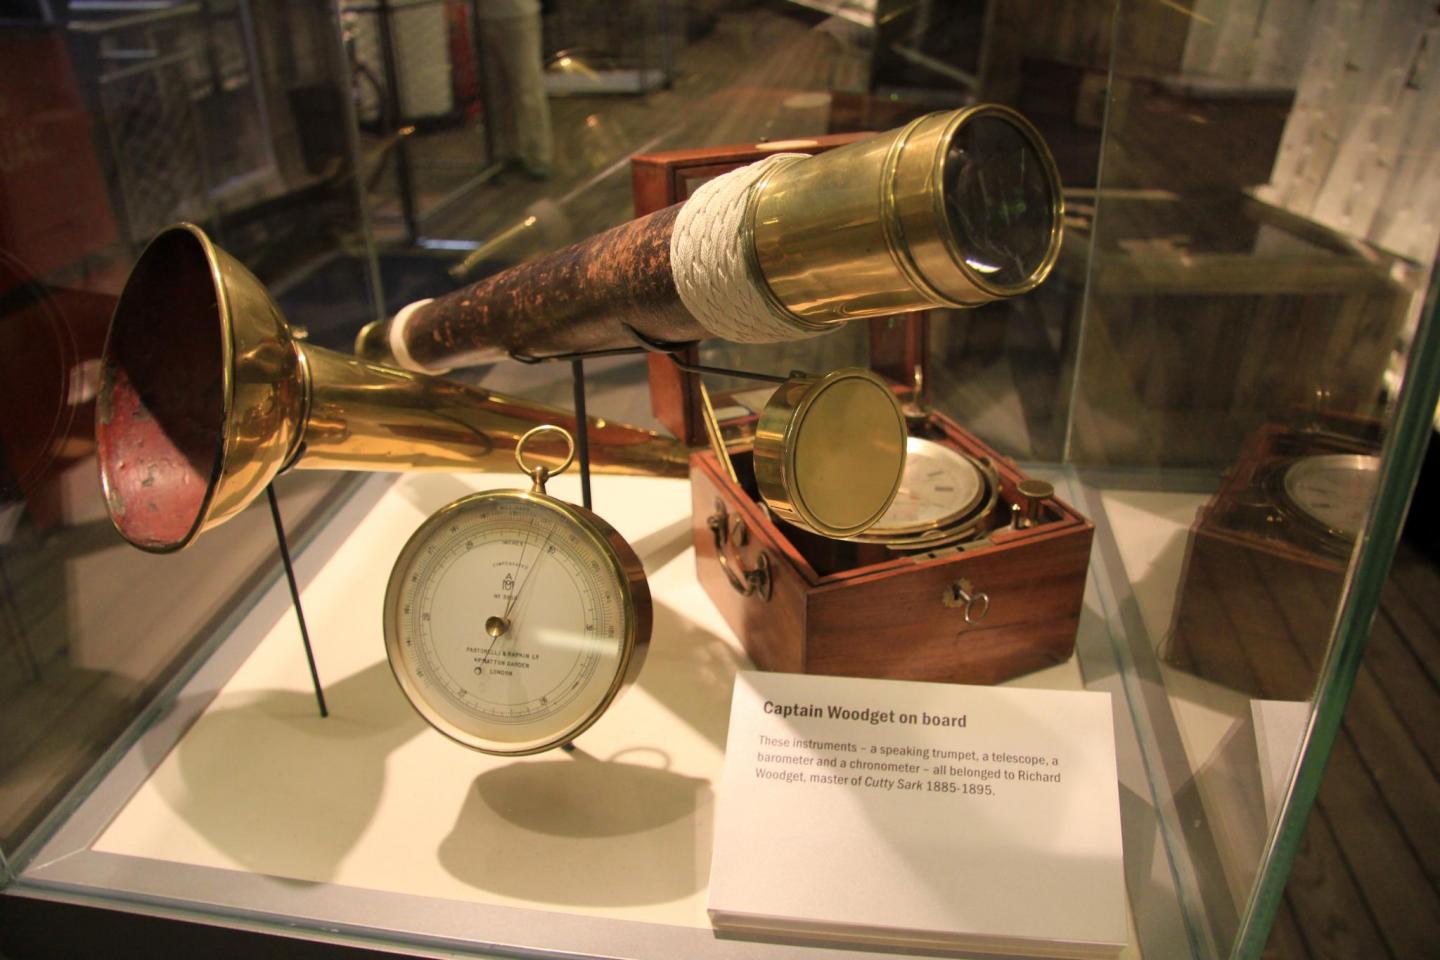 A speaking trumpet, telescope, barometer and a chronometer that all belonged to Captain Woodget